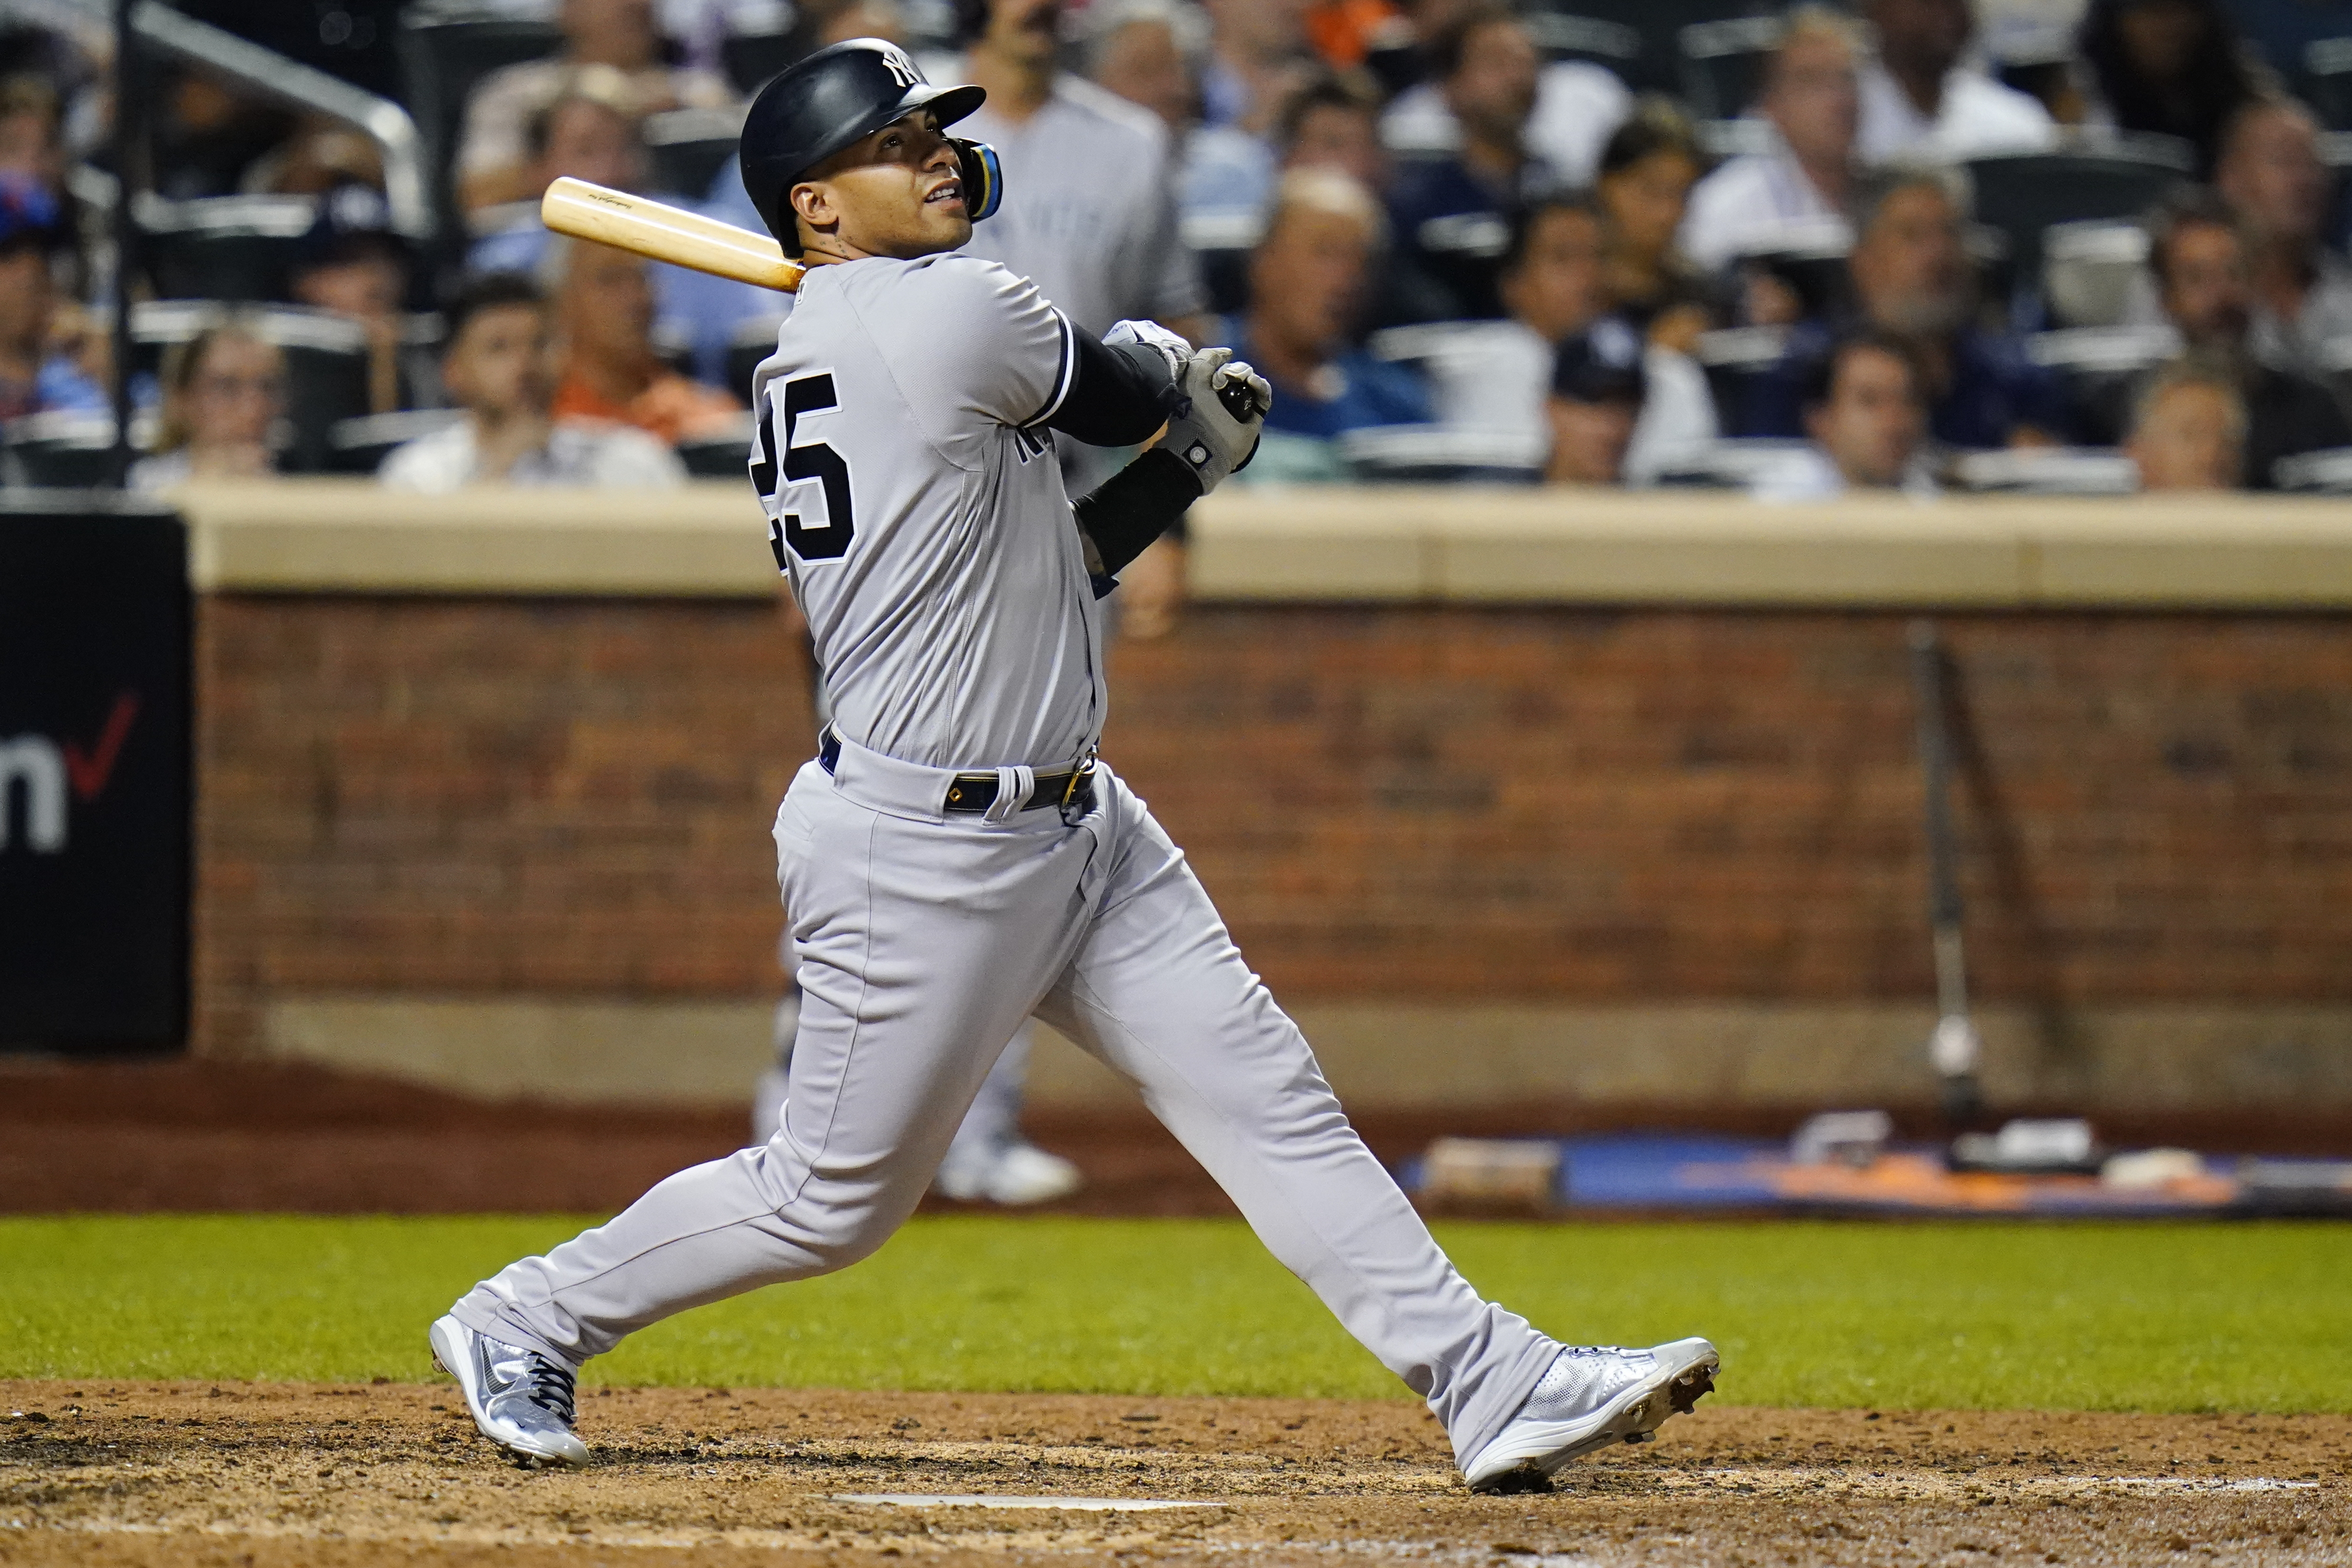 In Need of Infield Help, the Yankees Cautiously Consider Gleyber